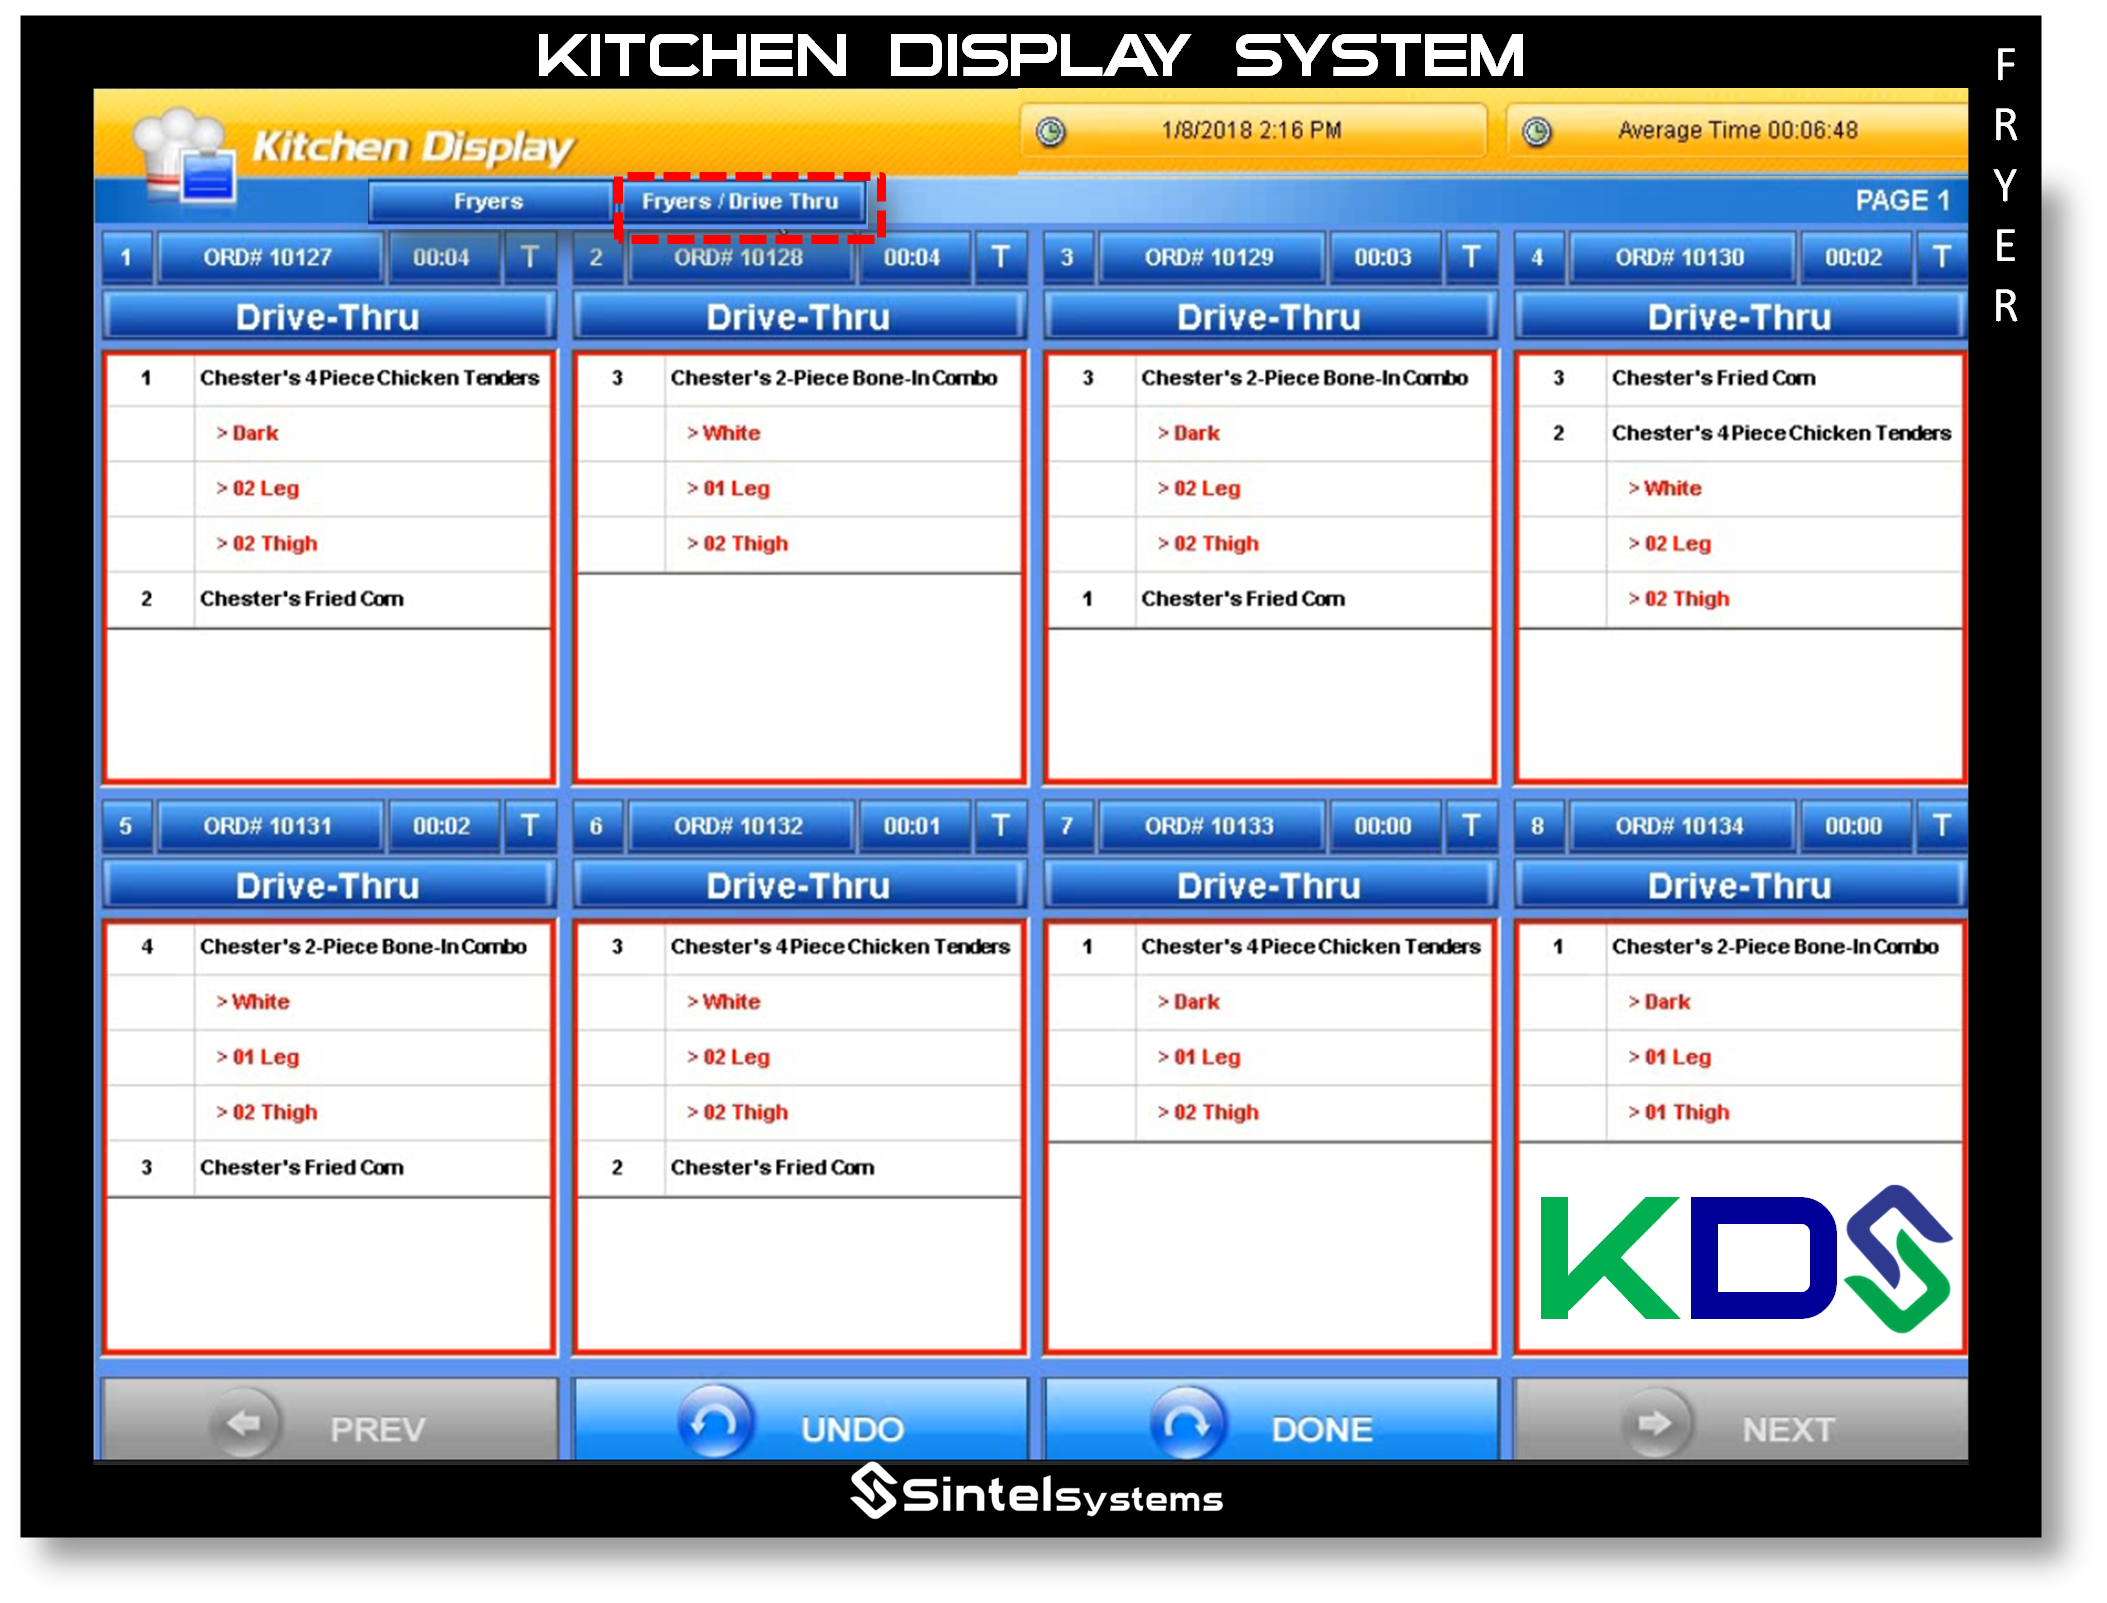 Image-1-KDS-Kitchen-Display-Systems-POS-Fryer